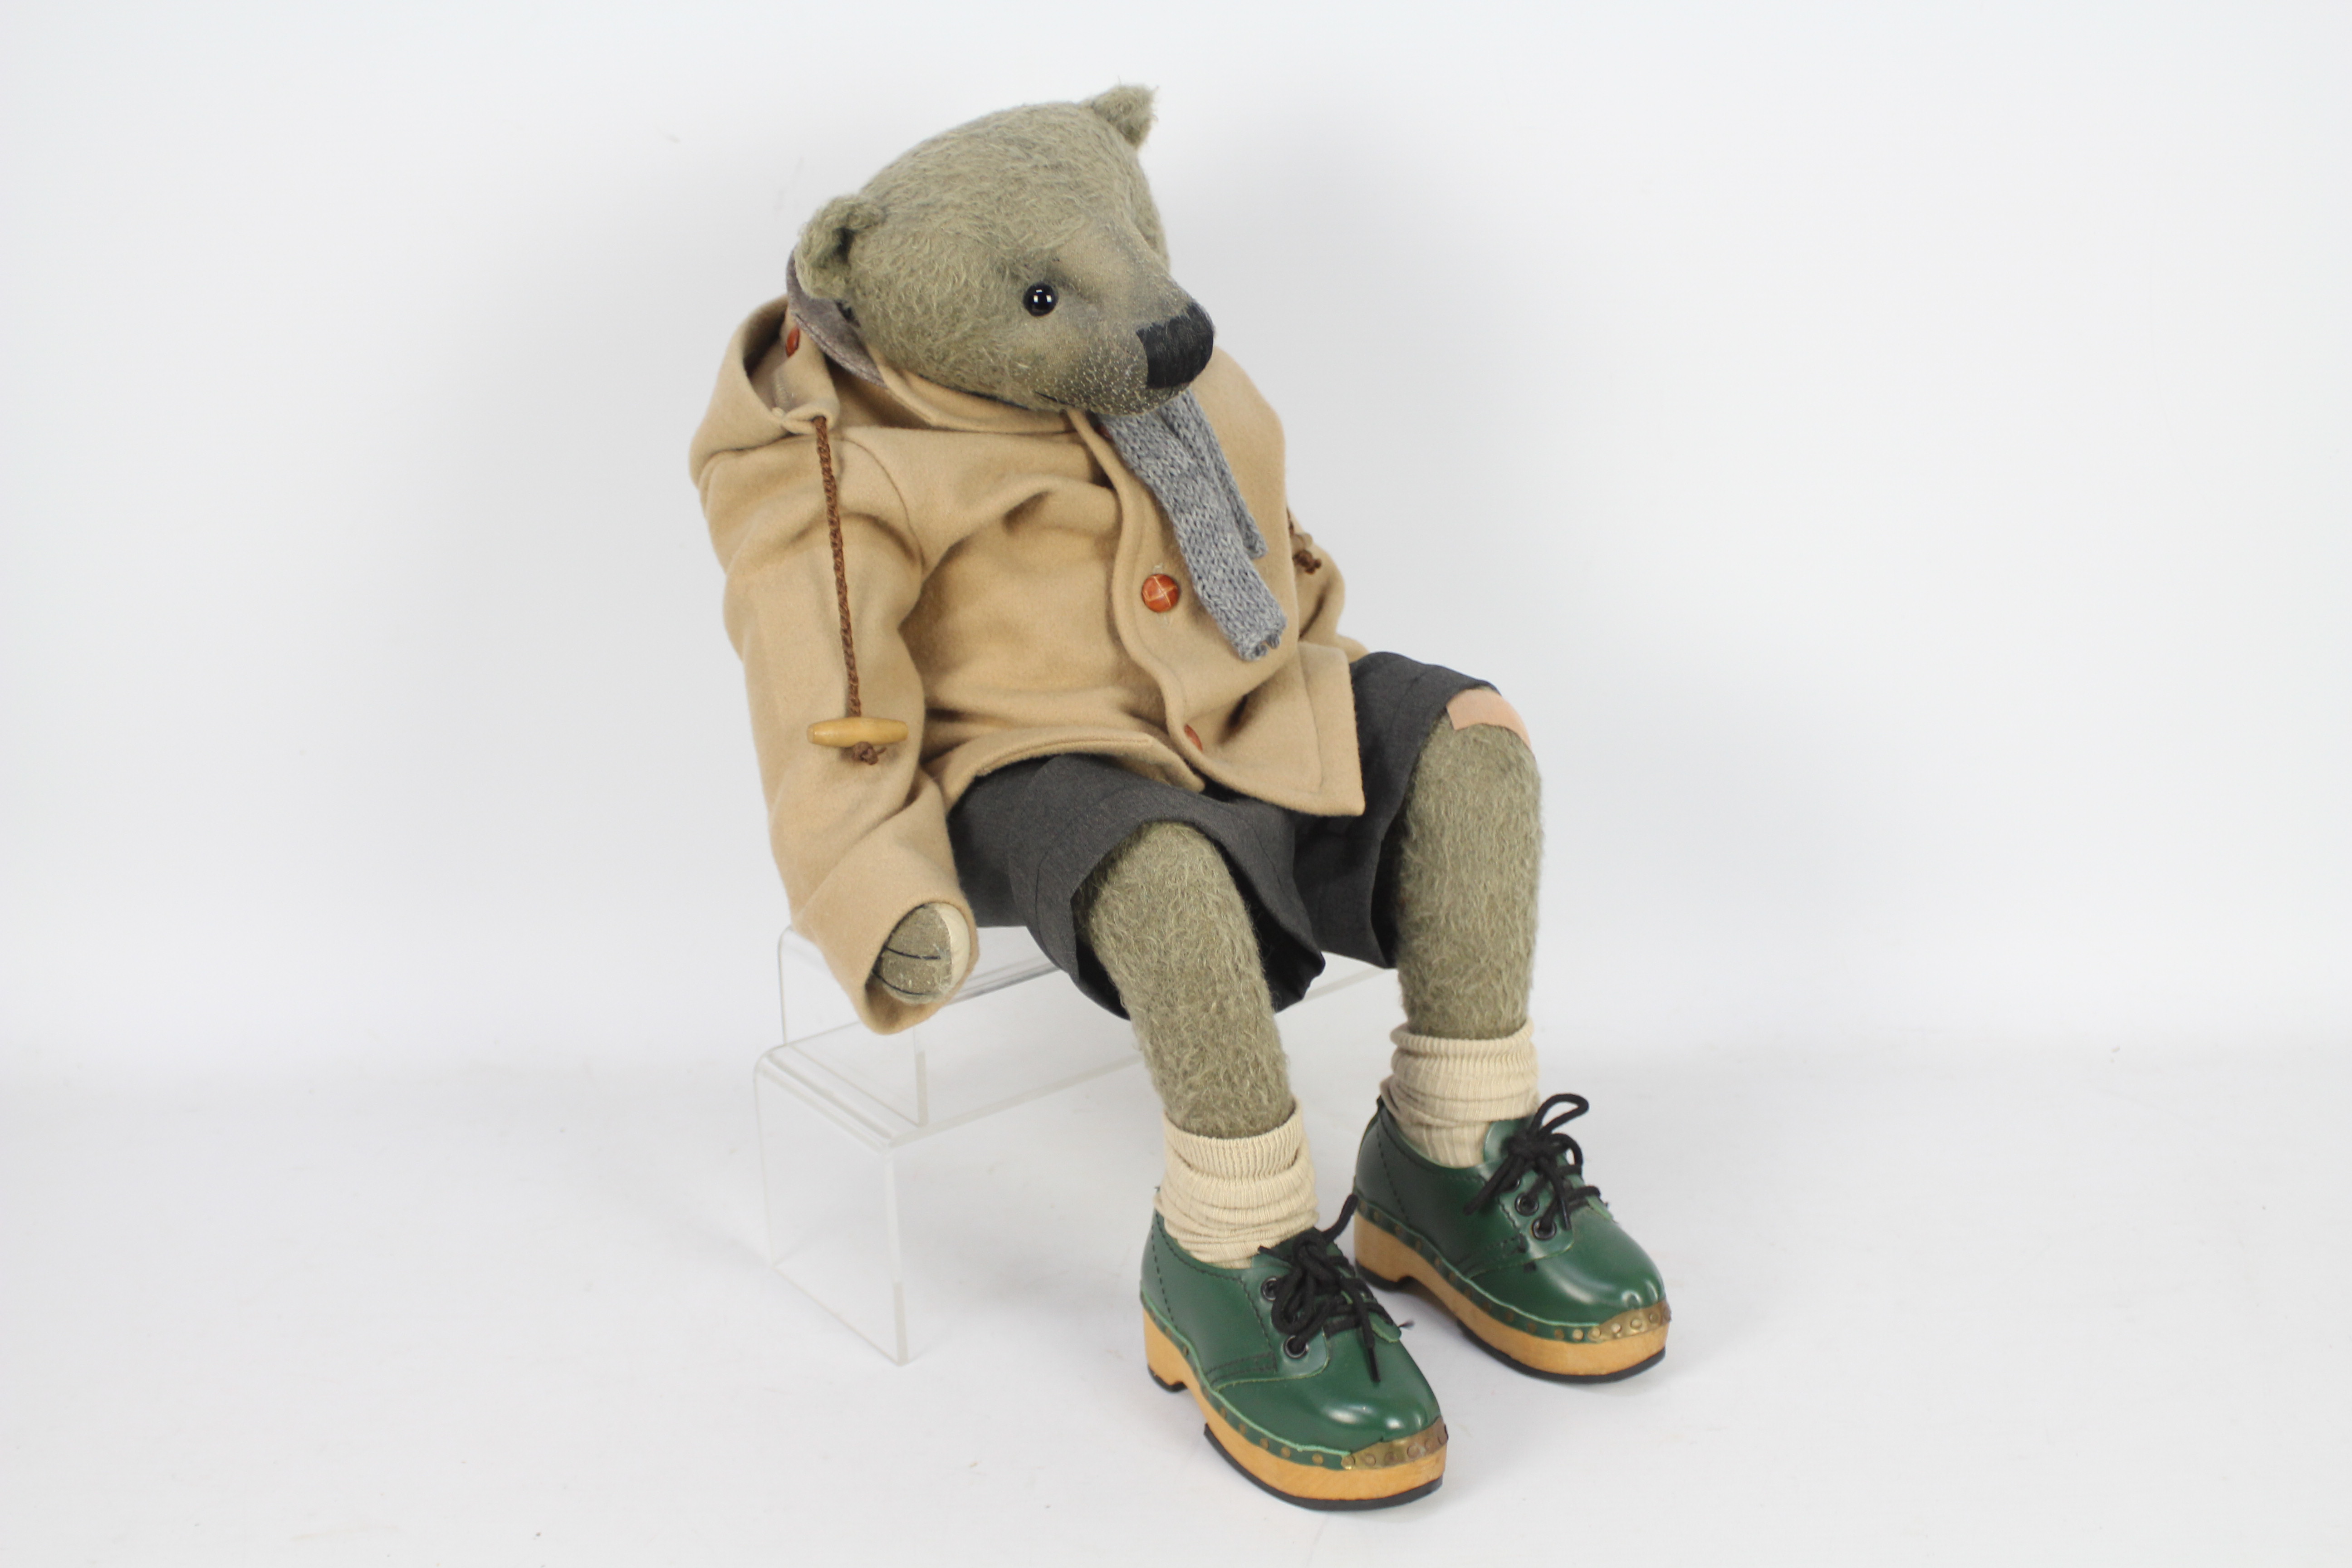 Parkside Bears - A large seated jointed bear called Walt made by Parkside Bears. - Image 2 of 5